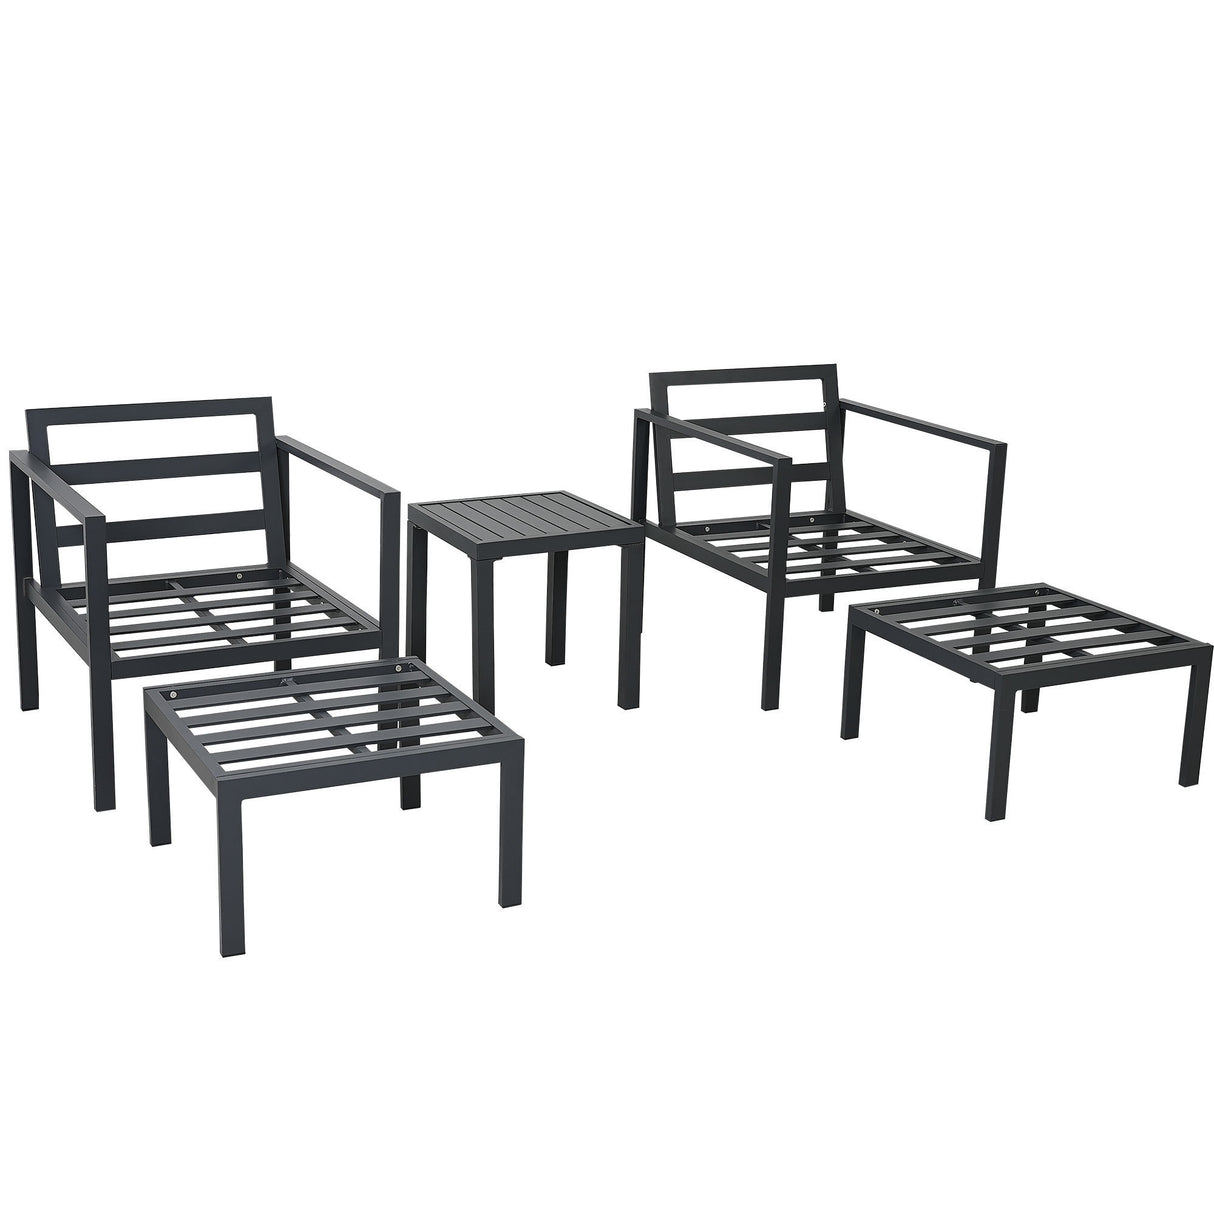 TOPMAX Outdoor Patio 5-piece Aluminum Alloy Conversation Set Sofa Set with Coffee Table and Stools for Poolside, Garden,Black Frame+Gray Cushion